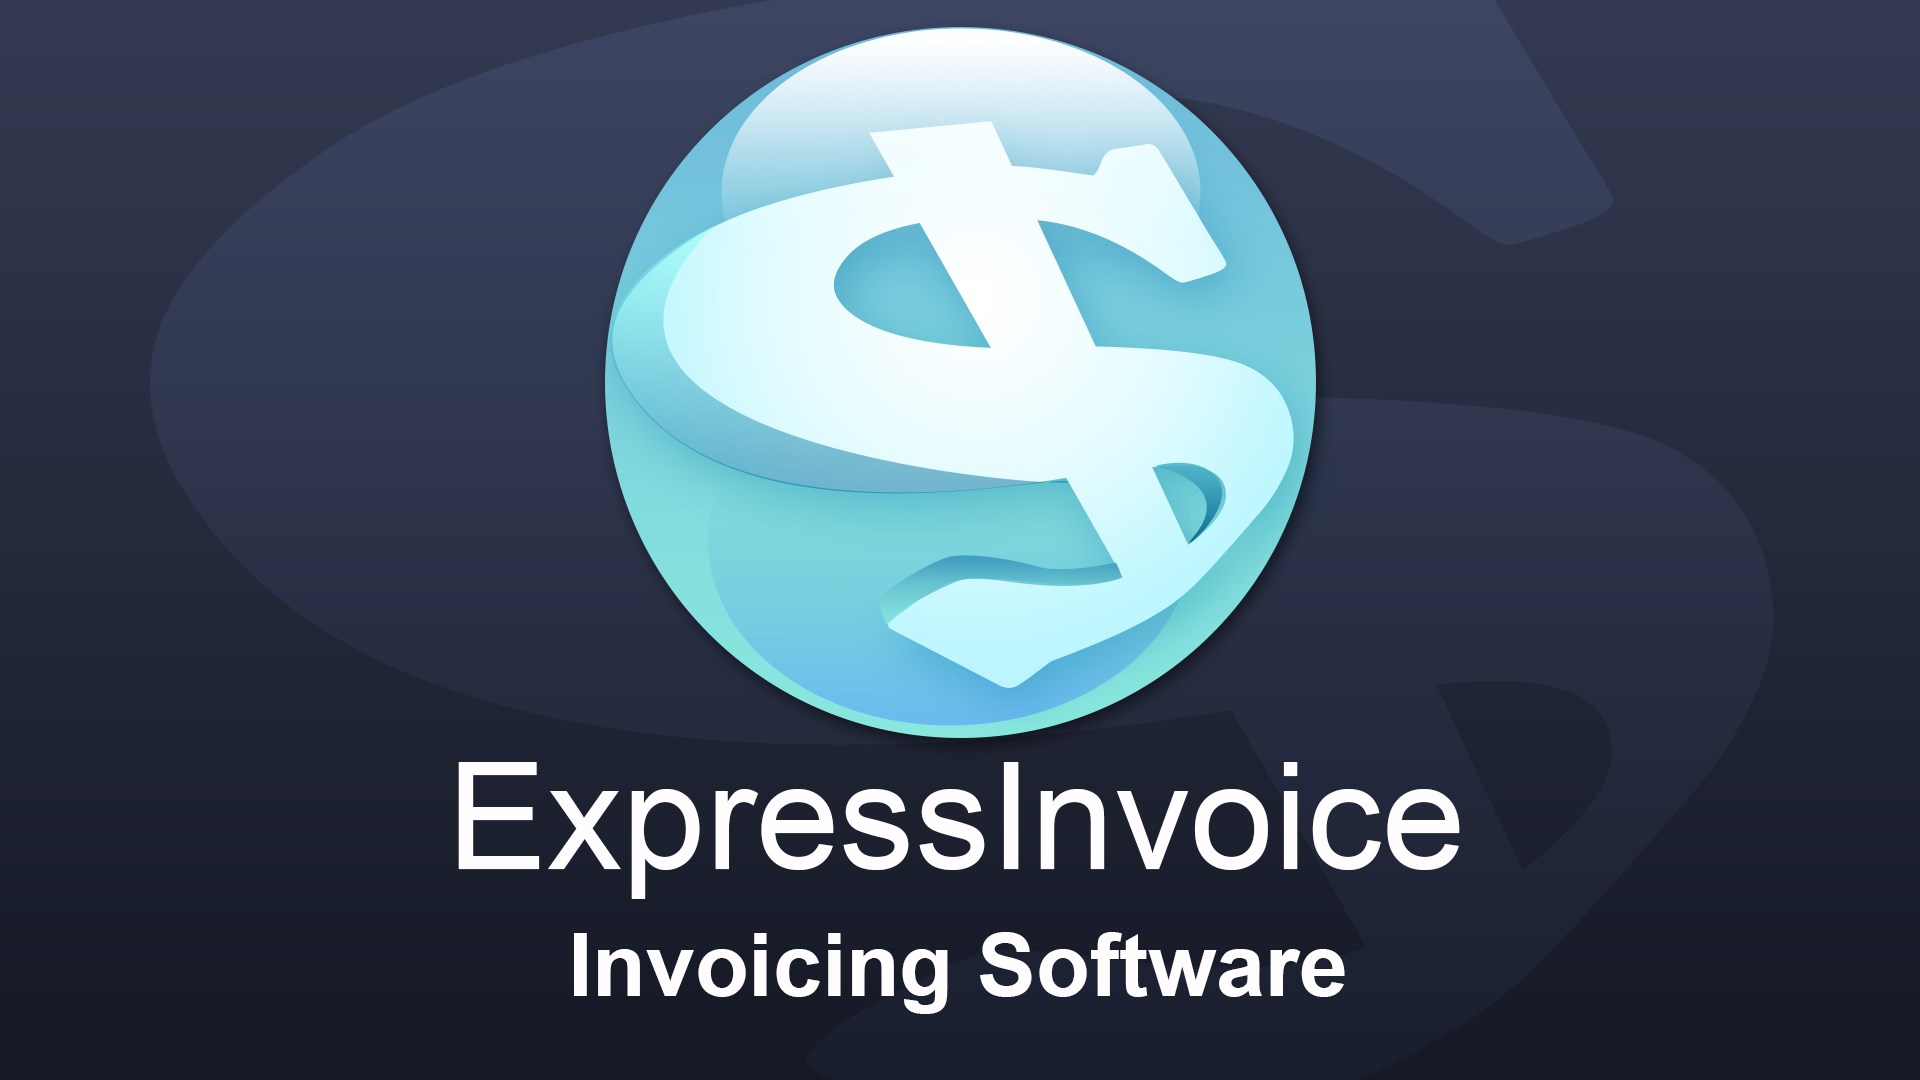 NCH: Express Invoice Invoicing Key 203.62 $